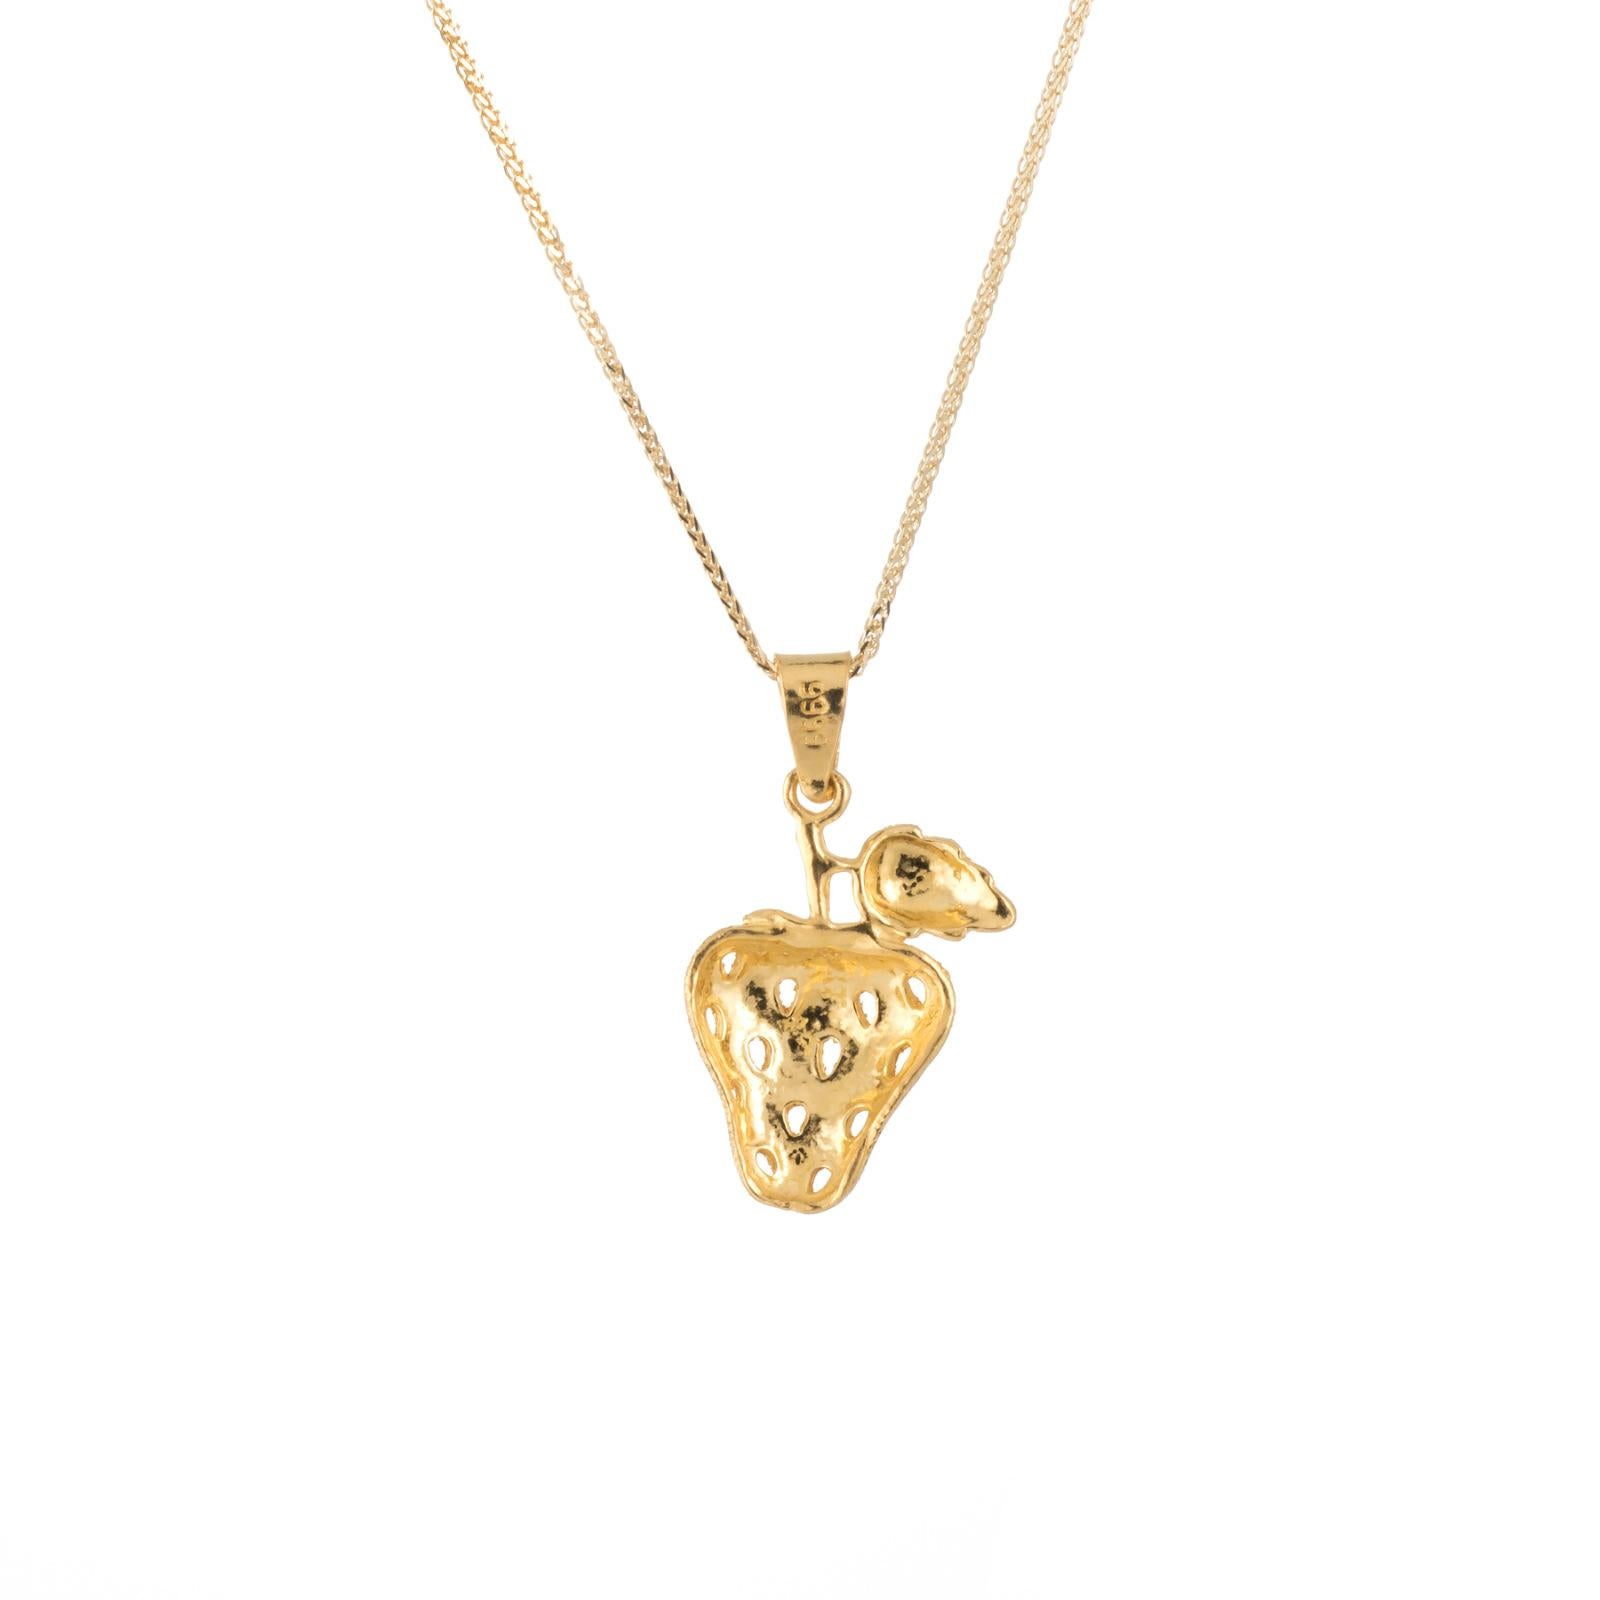 Charming strawberry pendant & necklace, crafted in 24 karat yellow gold (pendant) and 14 karat yellow gold (chain).  

The pendant comes with a fine link 14k yellow chain that measures 16 inches in length.

The pendant & necklace is in very good